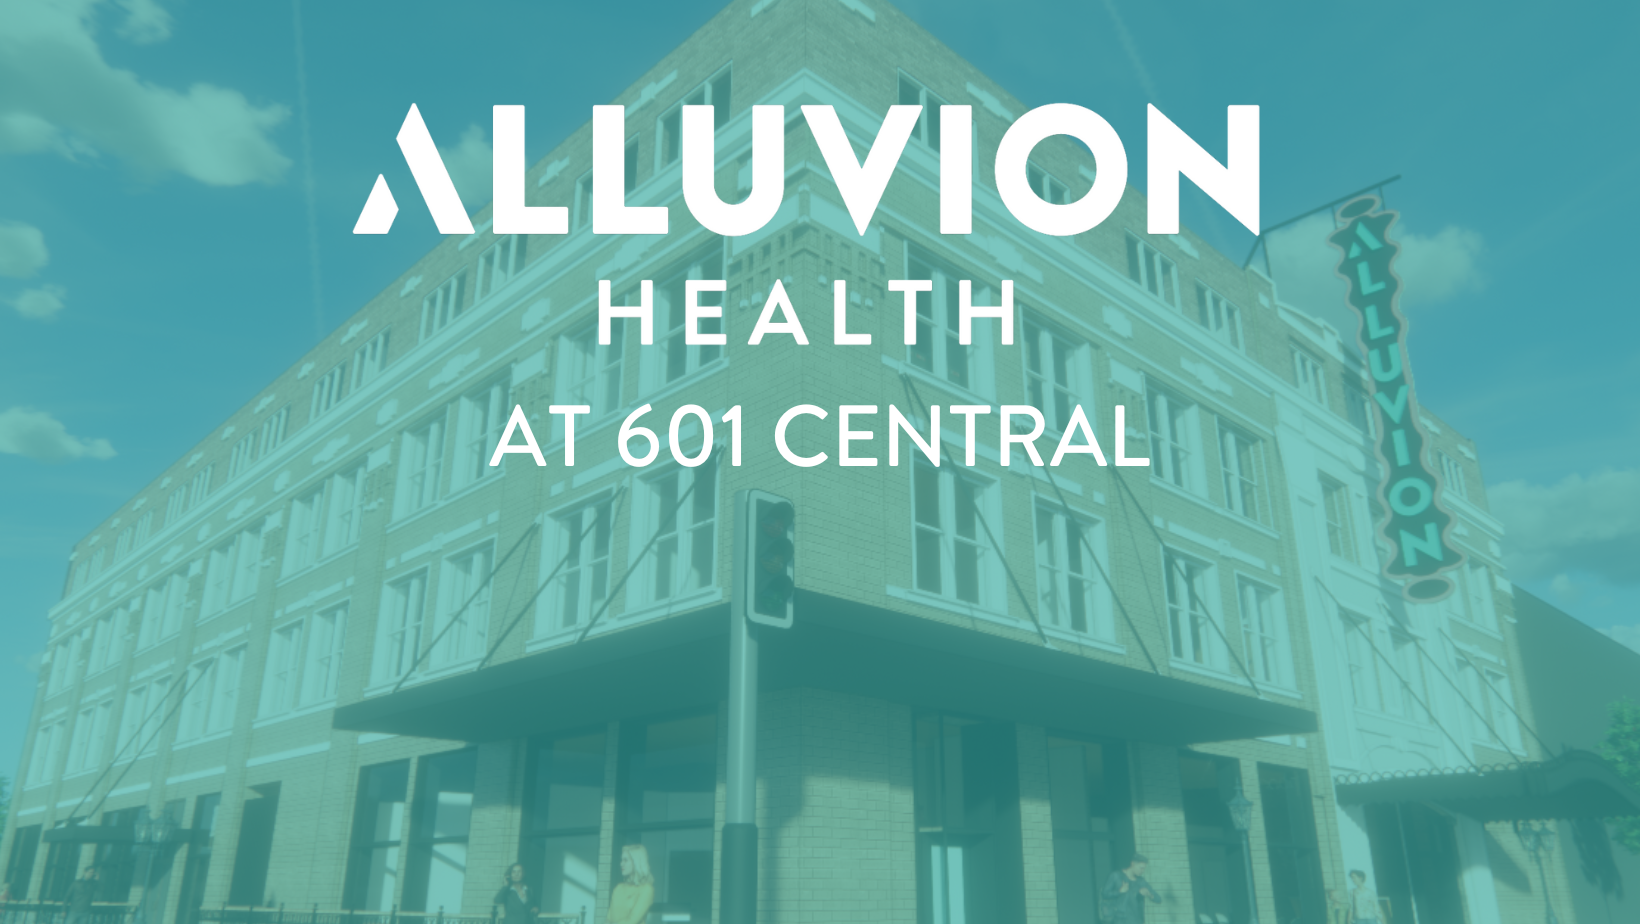 Mock-up of complete Alluvion Health at 601 Central building